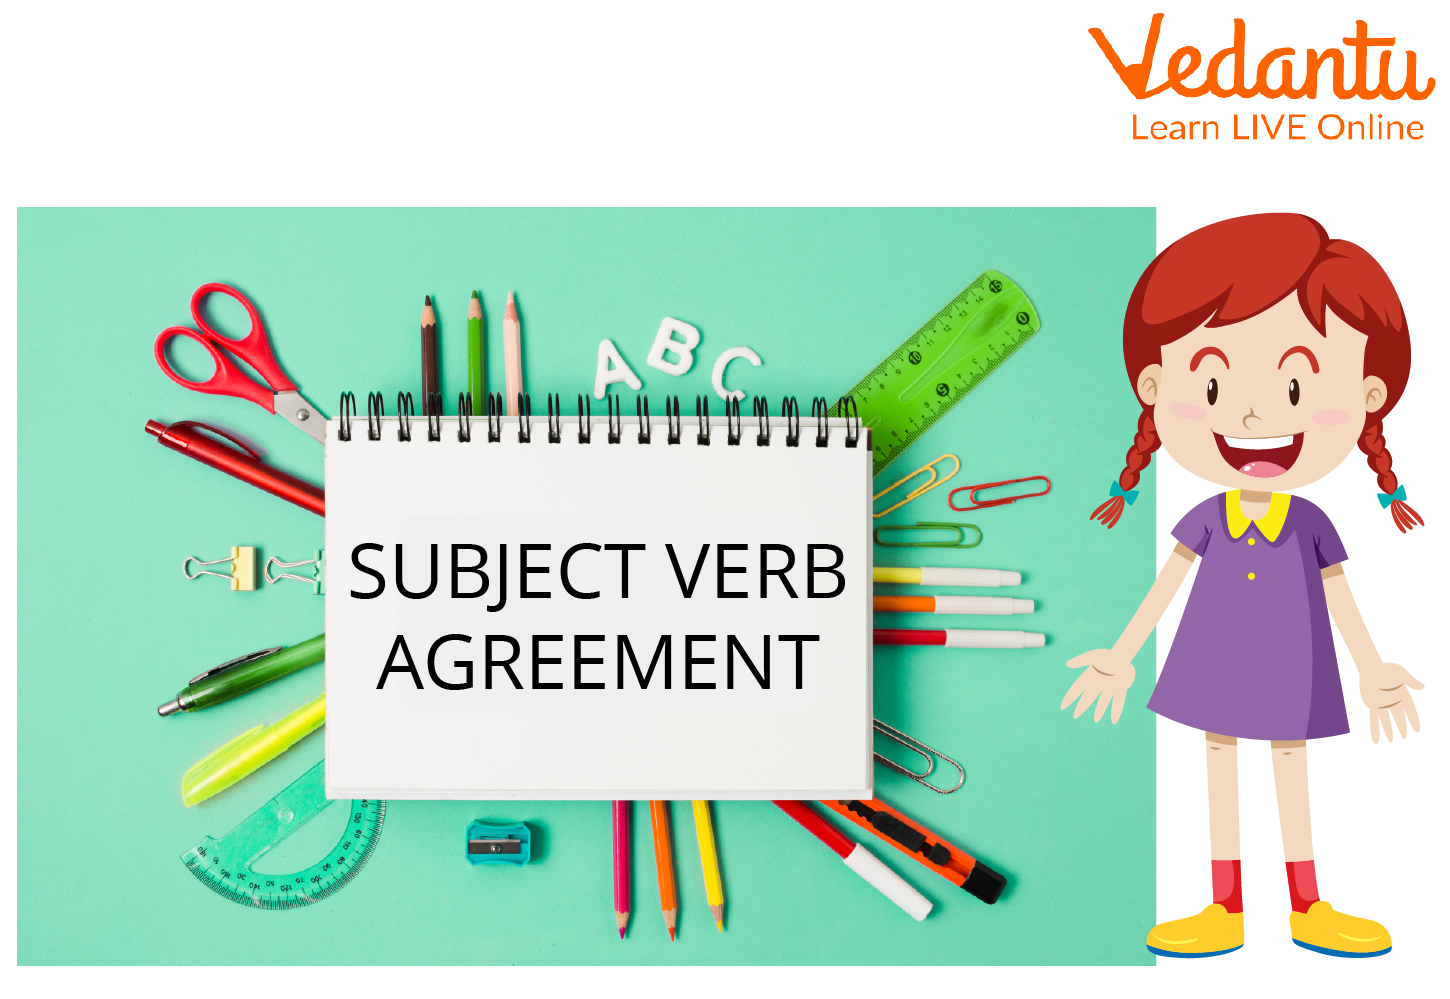 Subject-Verb Agreement